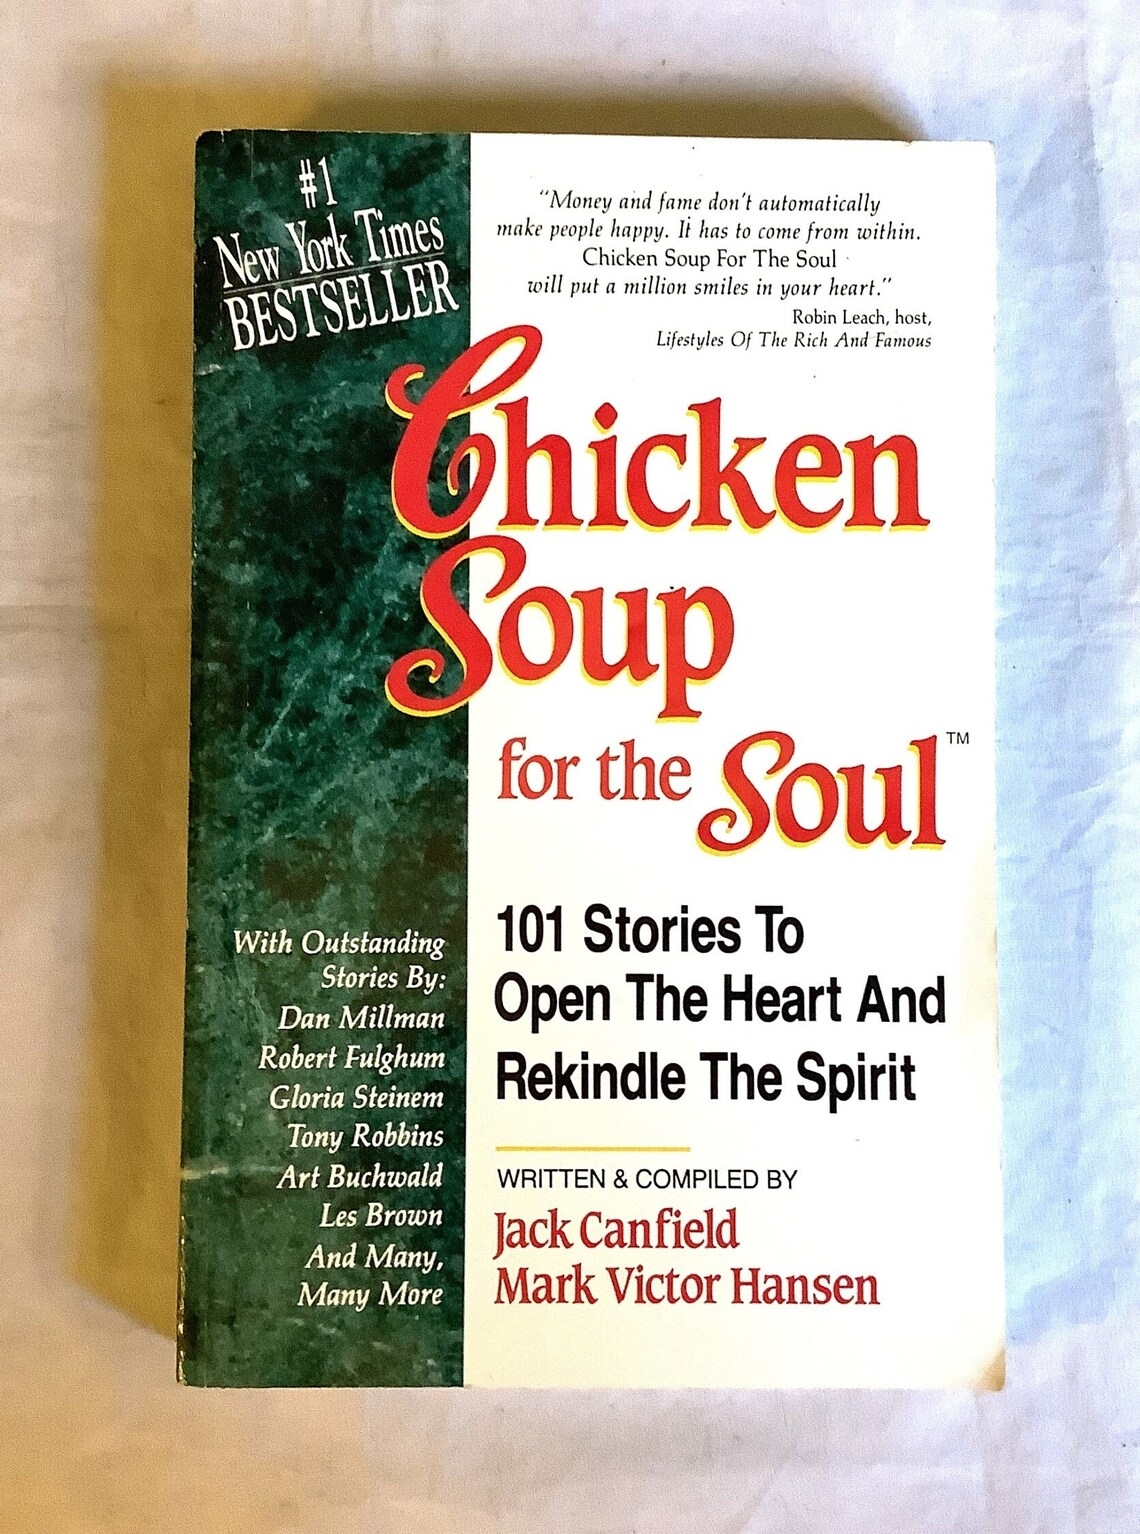 Book cover for &quot;Chicken Soup for the Soul: 101 Stories to Open the Heart and Rekindle the Spirit&quot; by Jack Canfield and Mark Victor Hansen, a #1 New York Times Bestseller